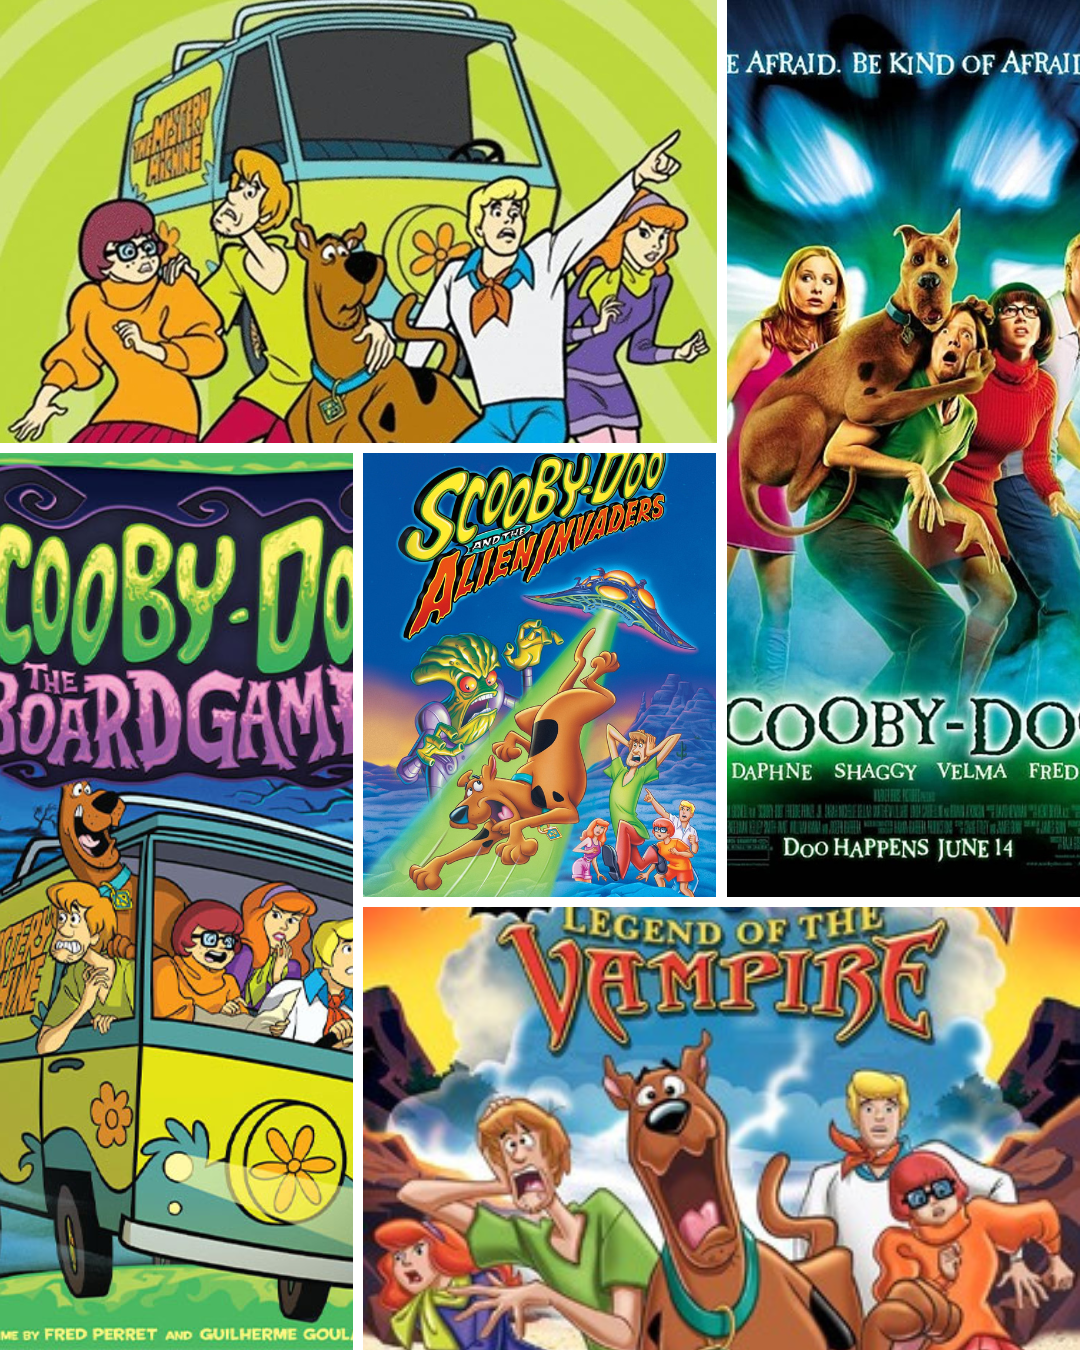 Scooby-Doo: Unraveling the Mystery Behind the Beloved Cartoon